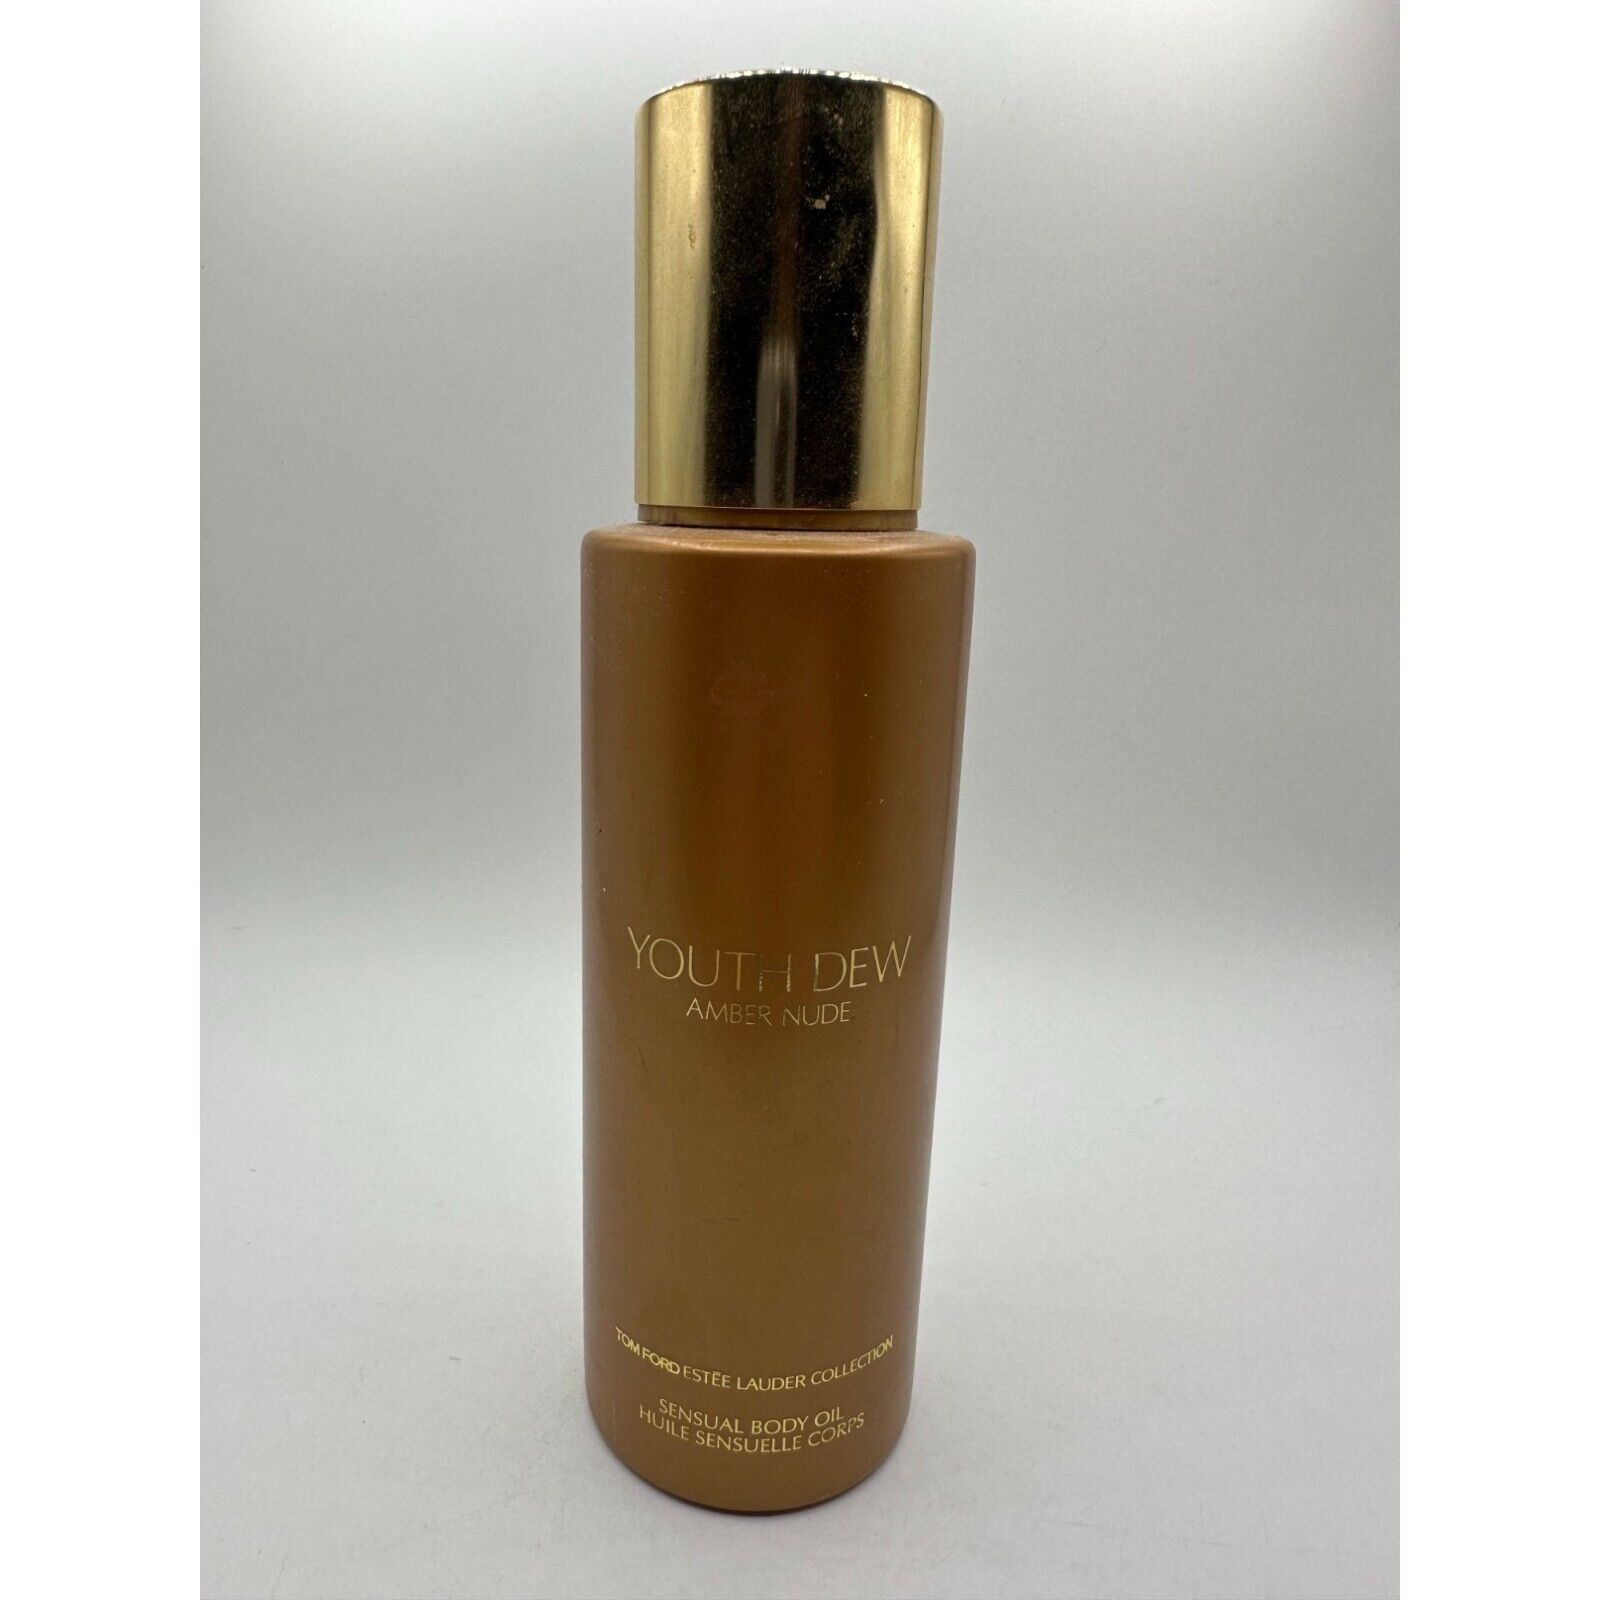 Tom Ford Estee Lauder Collection Youth Dew Amber Nude Sensational Body Oil